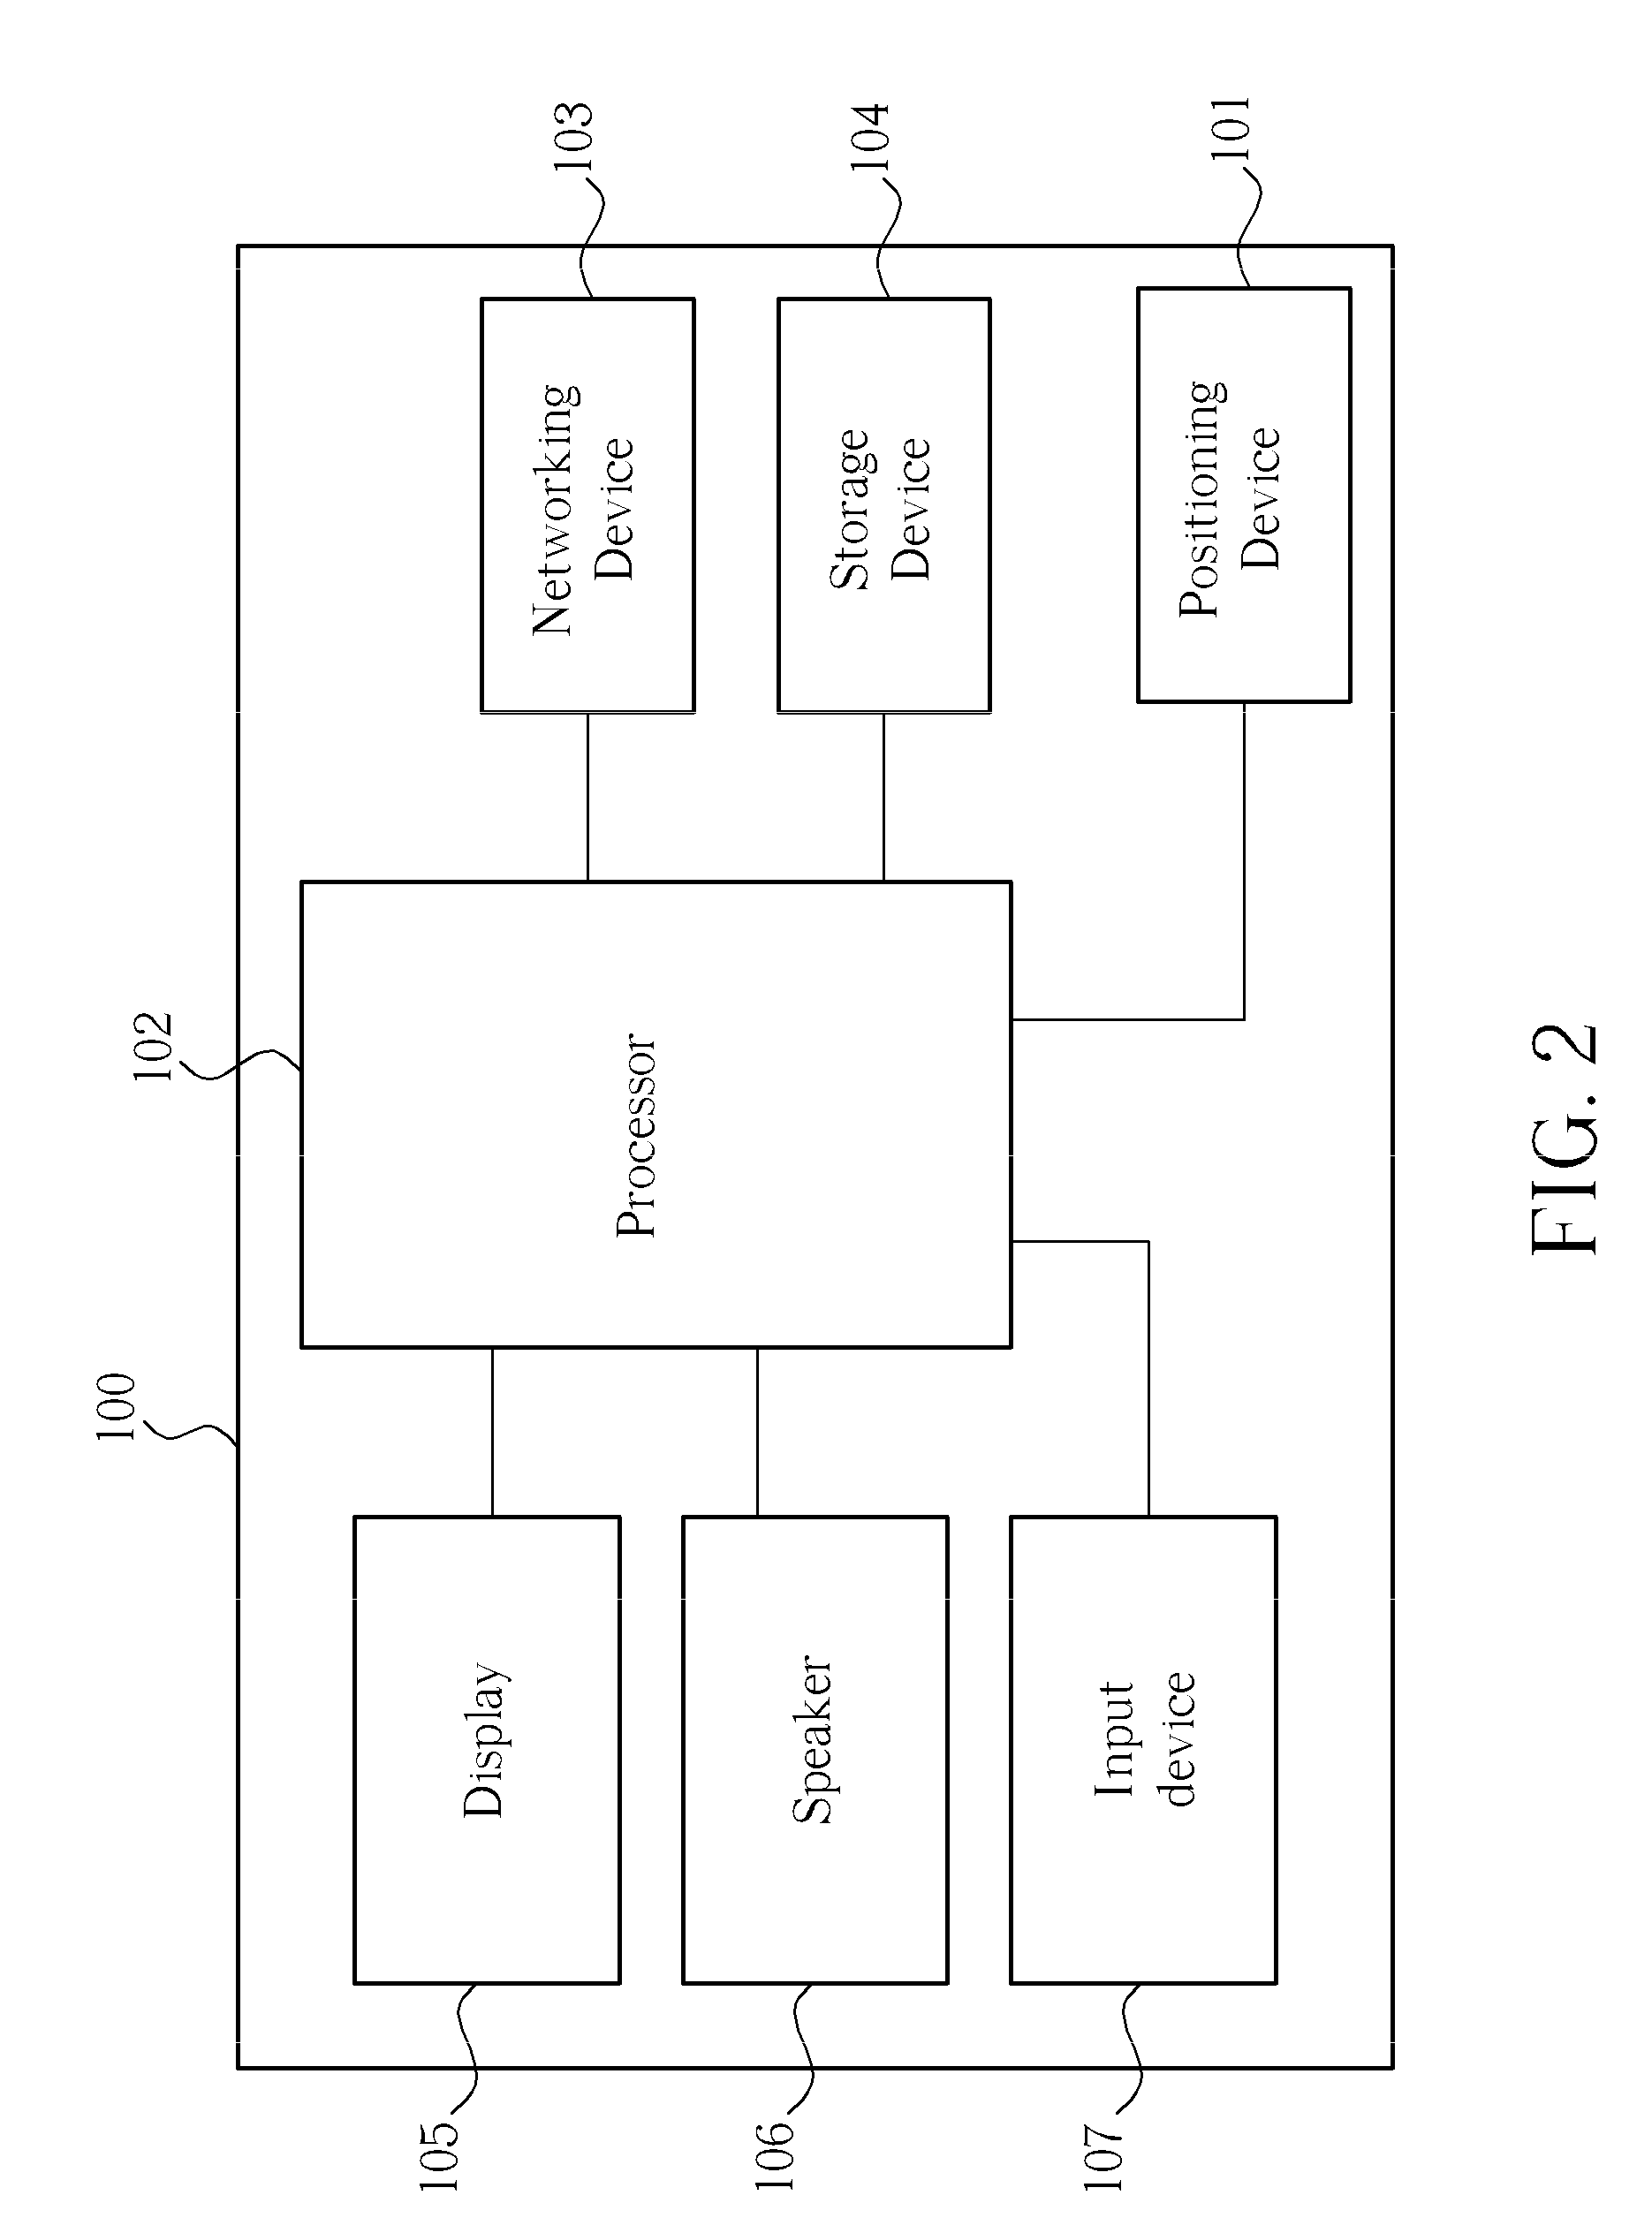 Method of Providing Crime-Related Safety Information to a User of a Personal Navigation Device and Related Device